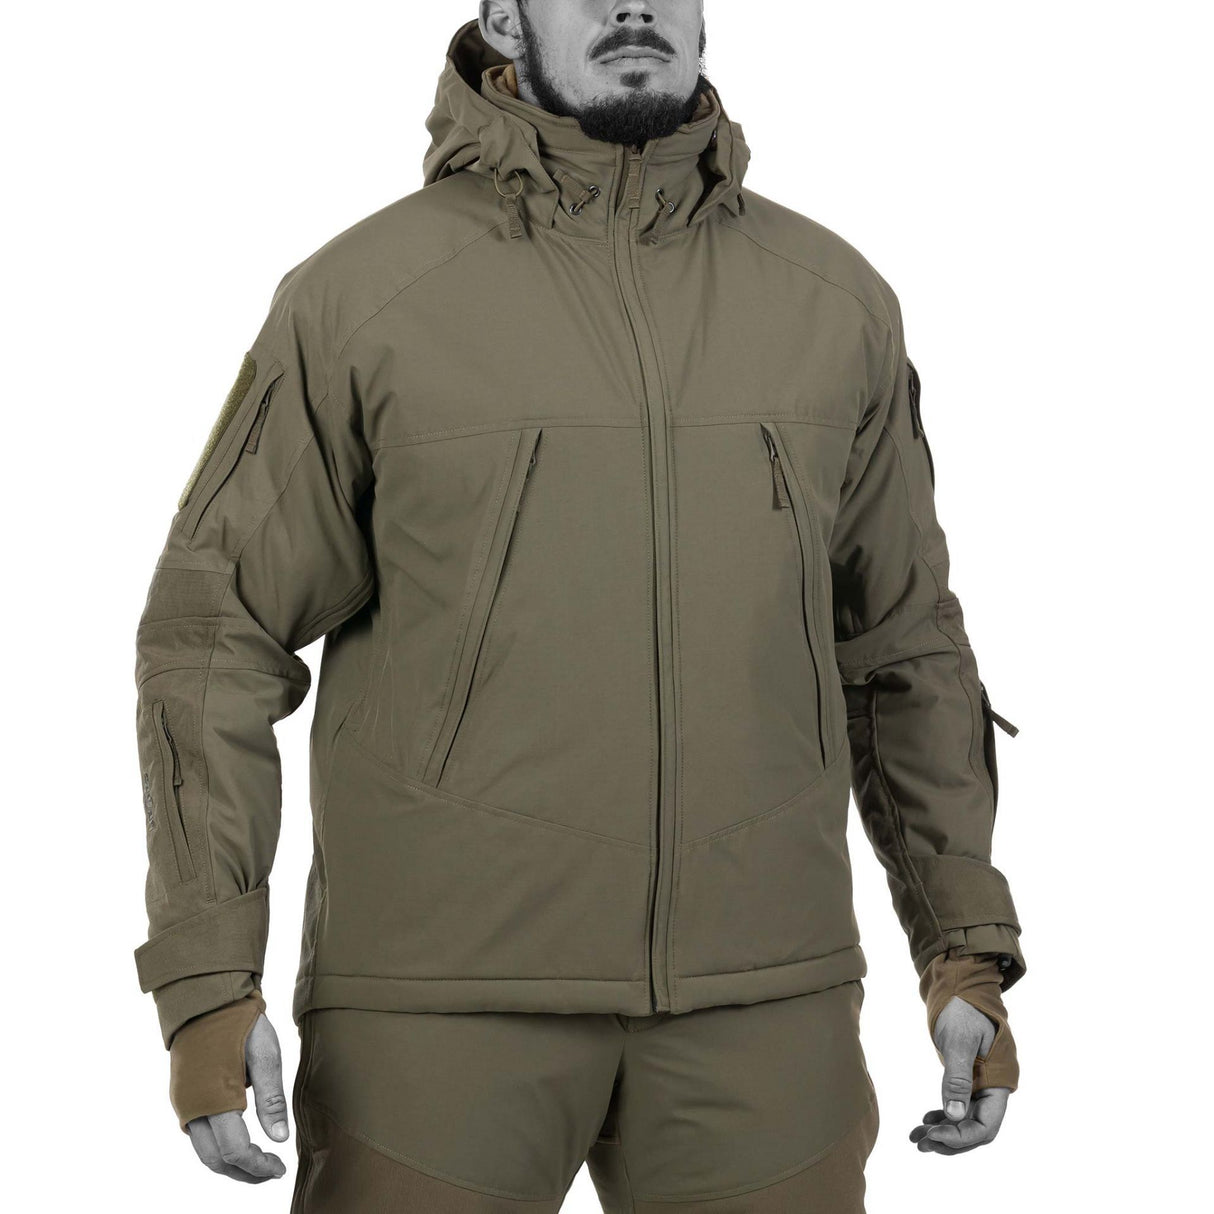 UF PRO Delta OL 4.0 Tactical Winter Jacket: Your ultimate solution for extreme cold operations.